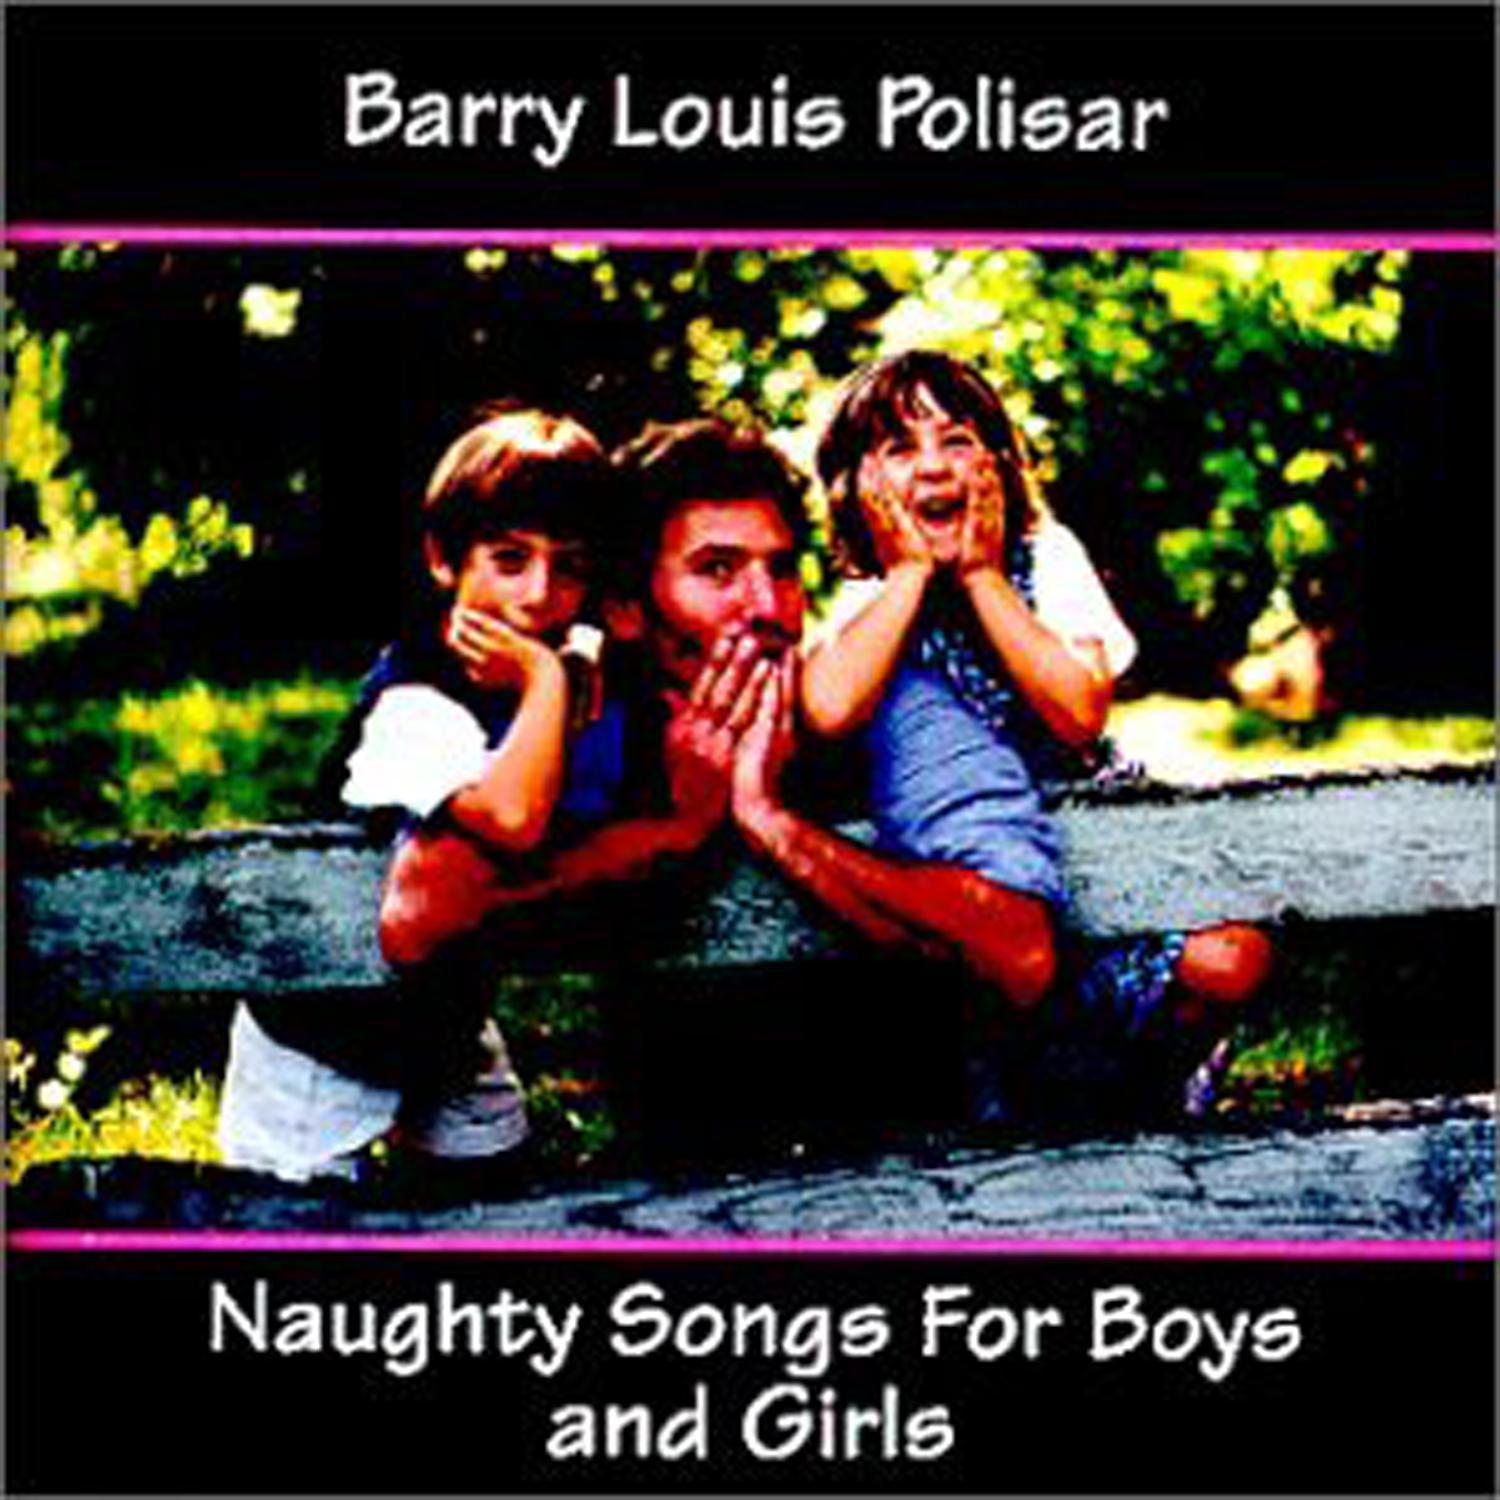 Barry Louis Polisar - You're As Sweet as Sugar on a Stick